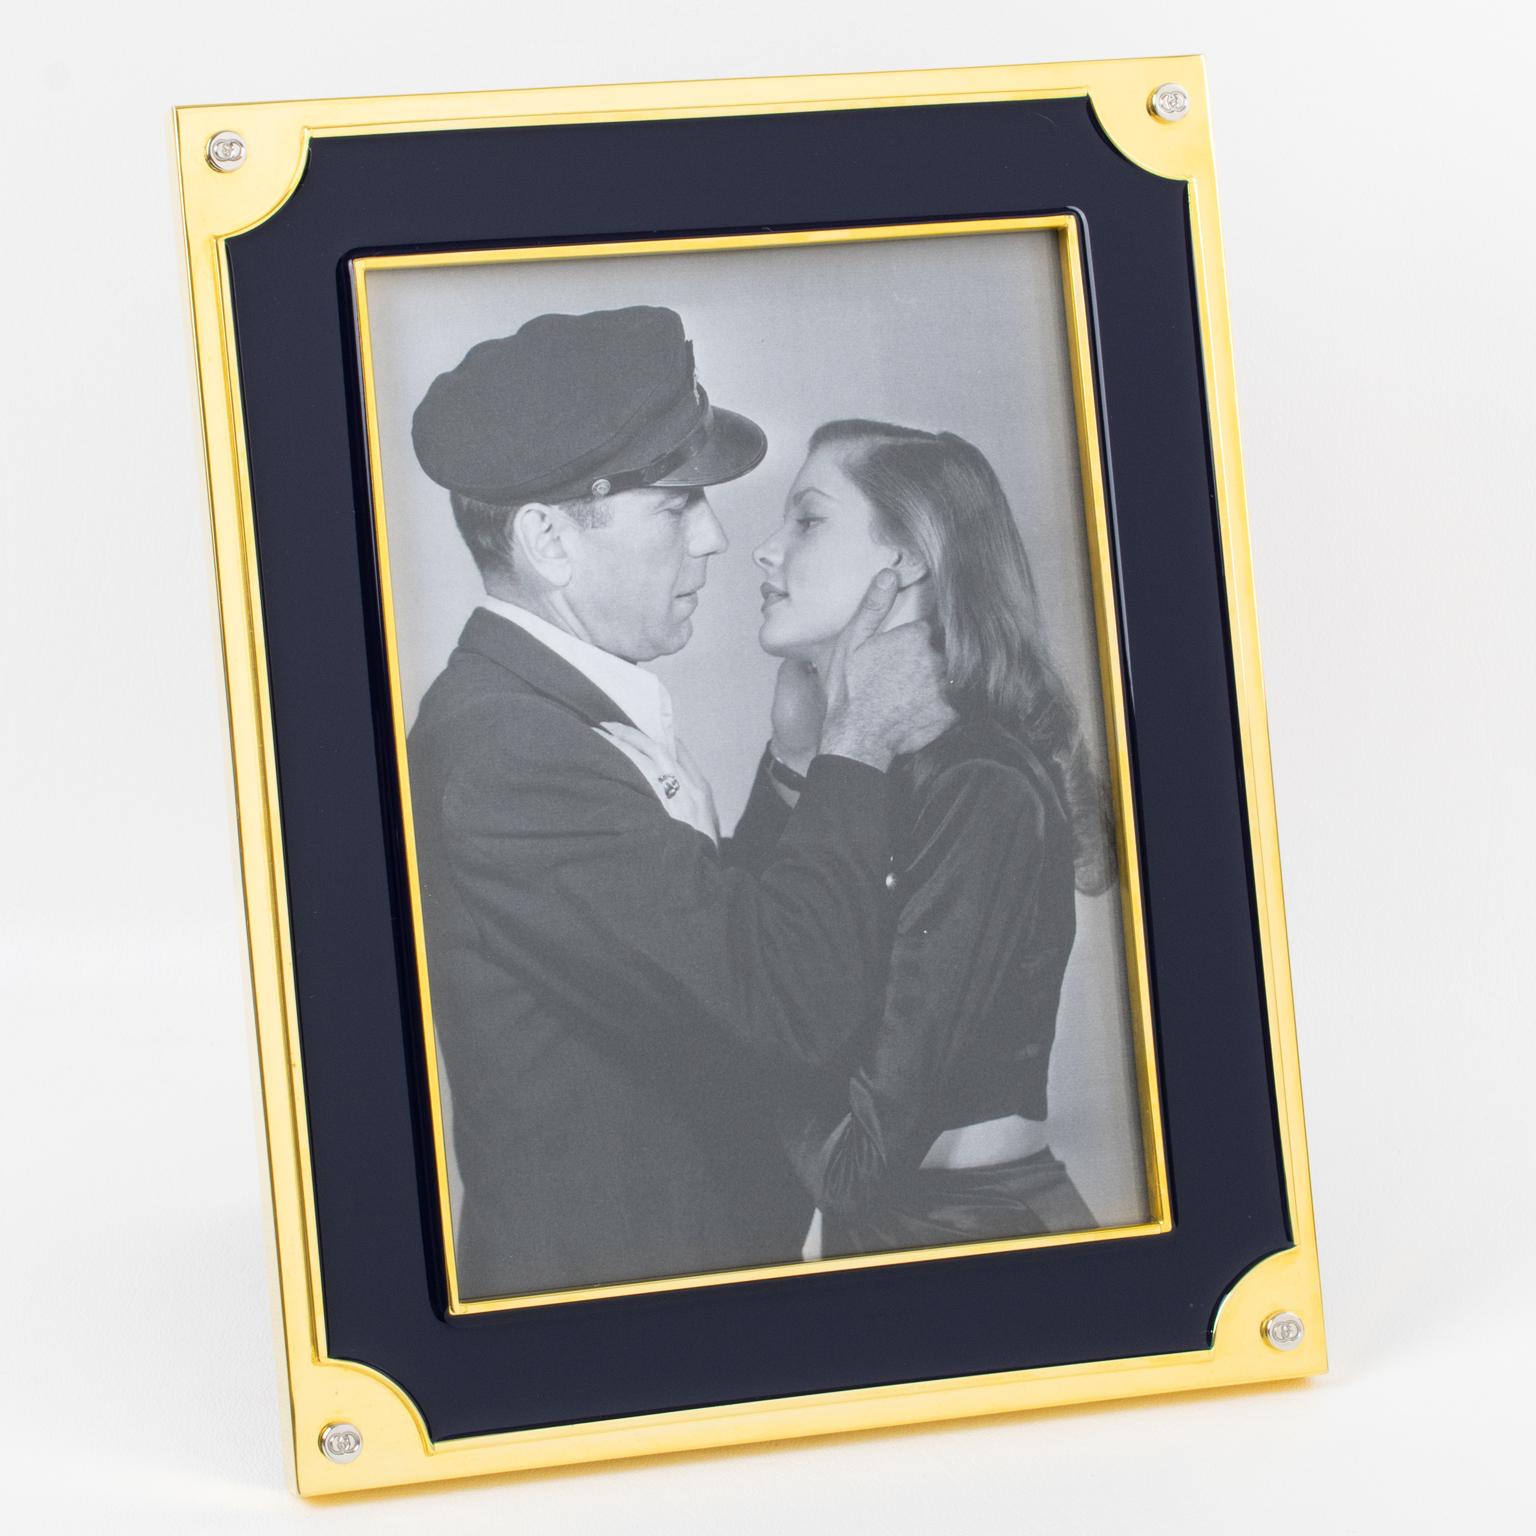 The Italian Fashion House Gucci crafted this luxury enamel and 24K gold plated picture photo frame. The polished gold-plated metal framing is topped with navy blue enamel. The back and easel are made with high gloss walnut wood. The frame is marked